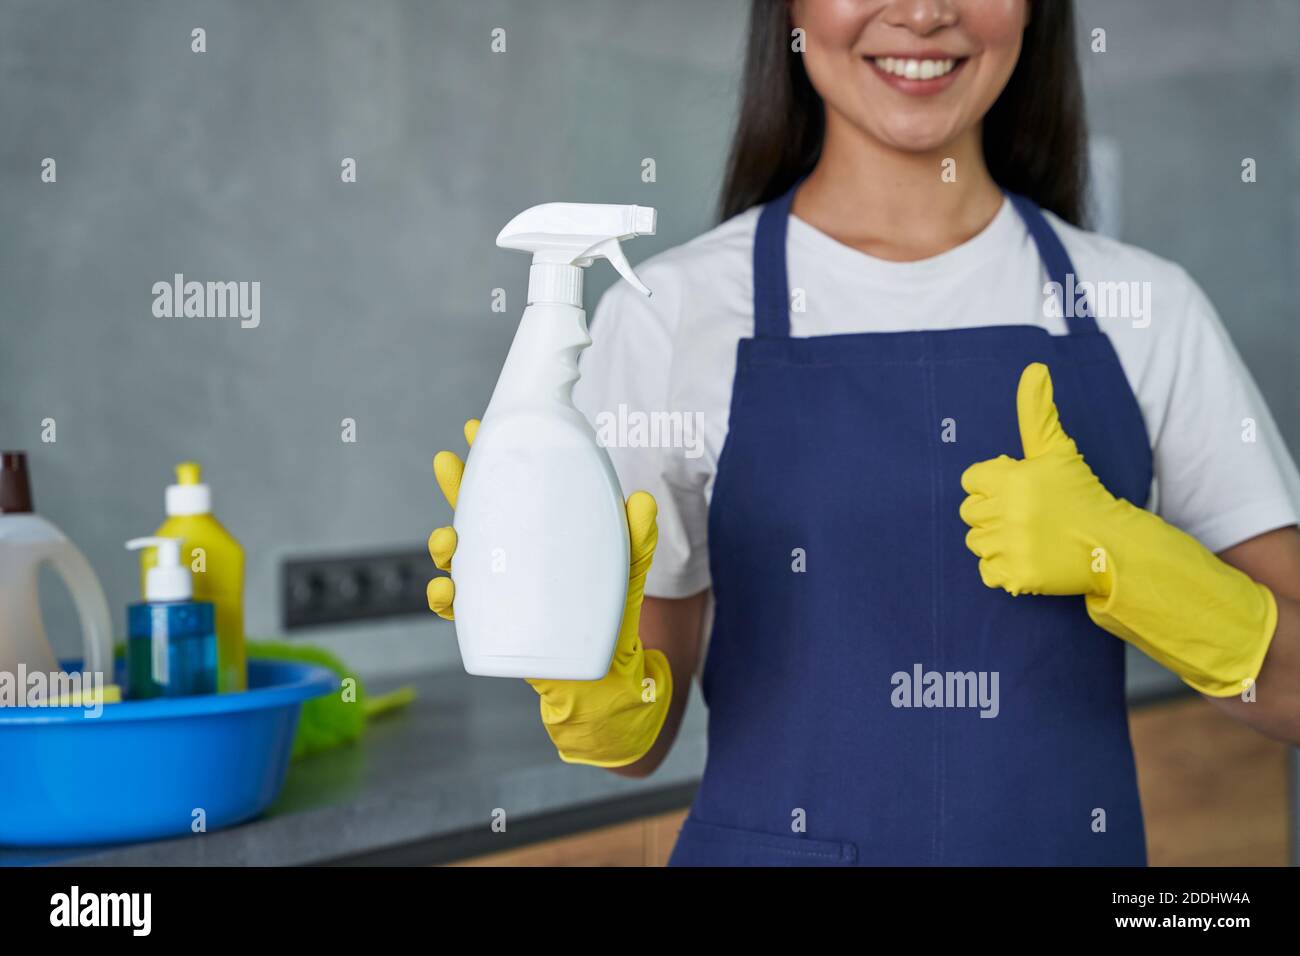 Cropped shot of smiling woman, cleaning lady showing thumbs up while holding household cleaning product, ready for cleaning the house. Housework and housekeeping, cleaning service concept Stock Photo